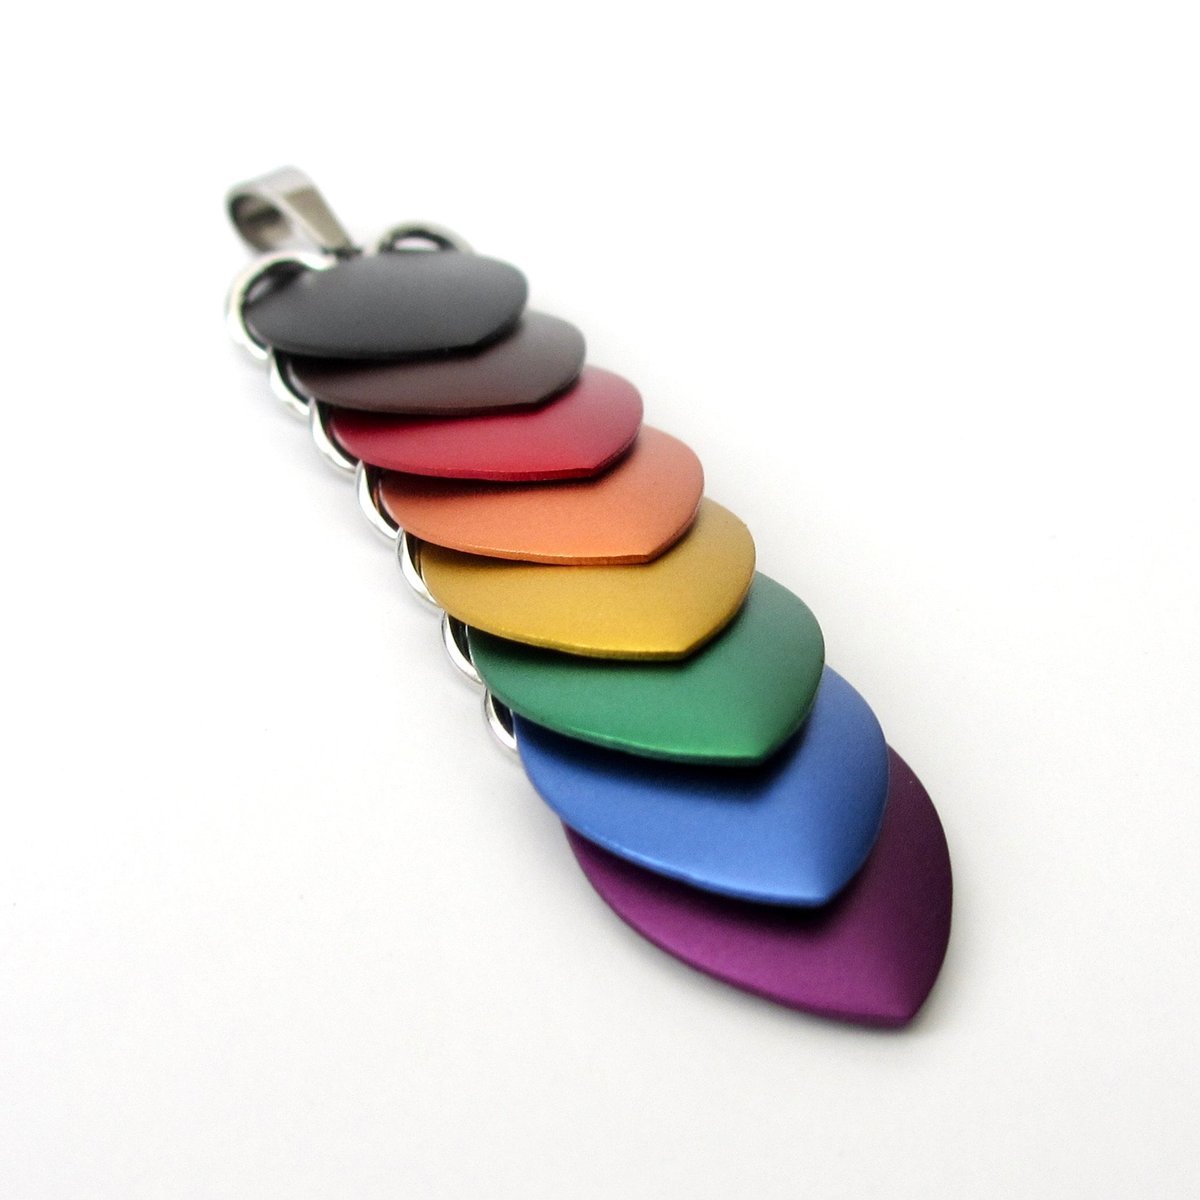 Philadelphia pride flag pendant - black, brown and rainbow 8 color chainmail scale pendant, LGBTQ gay pride necklace